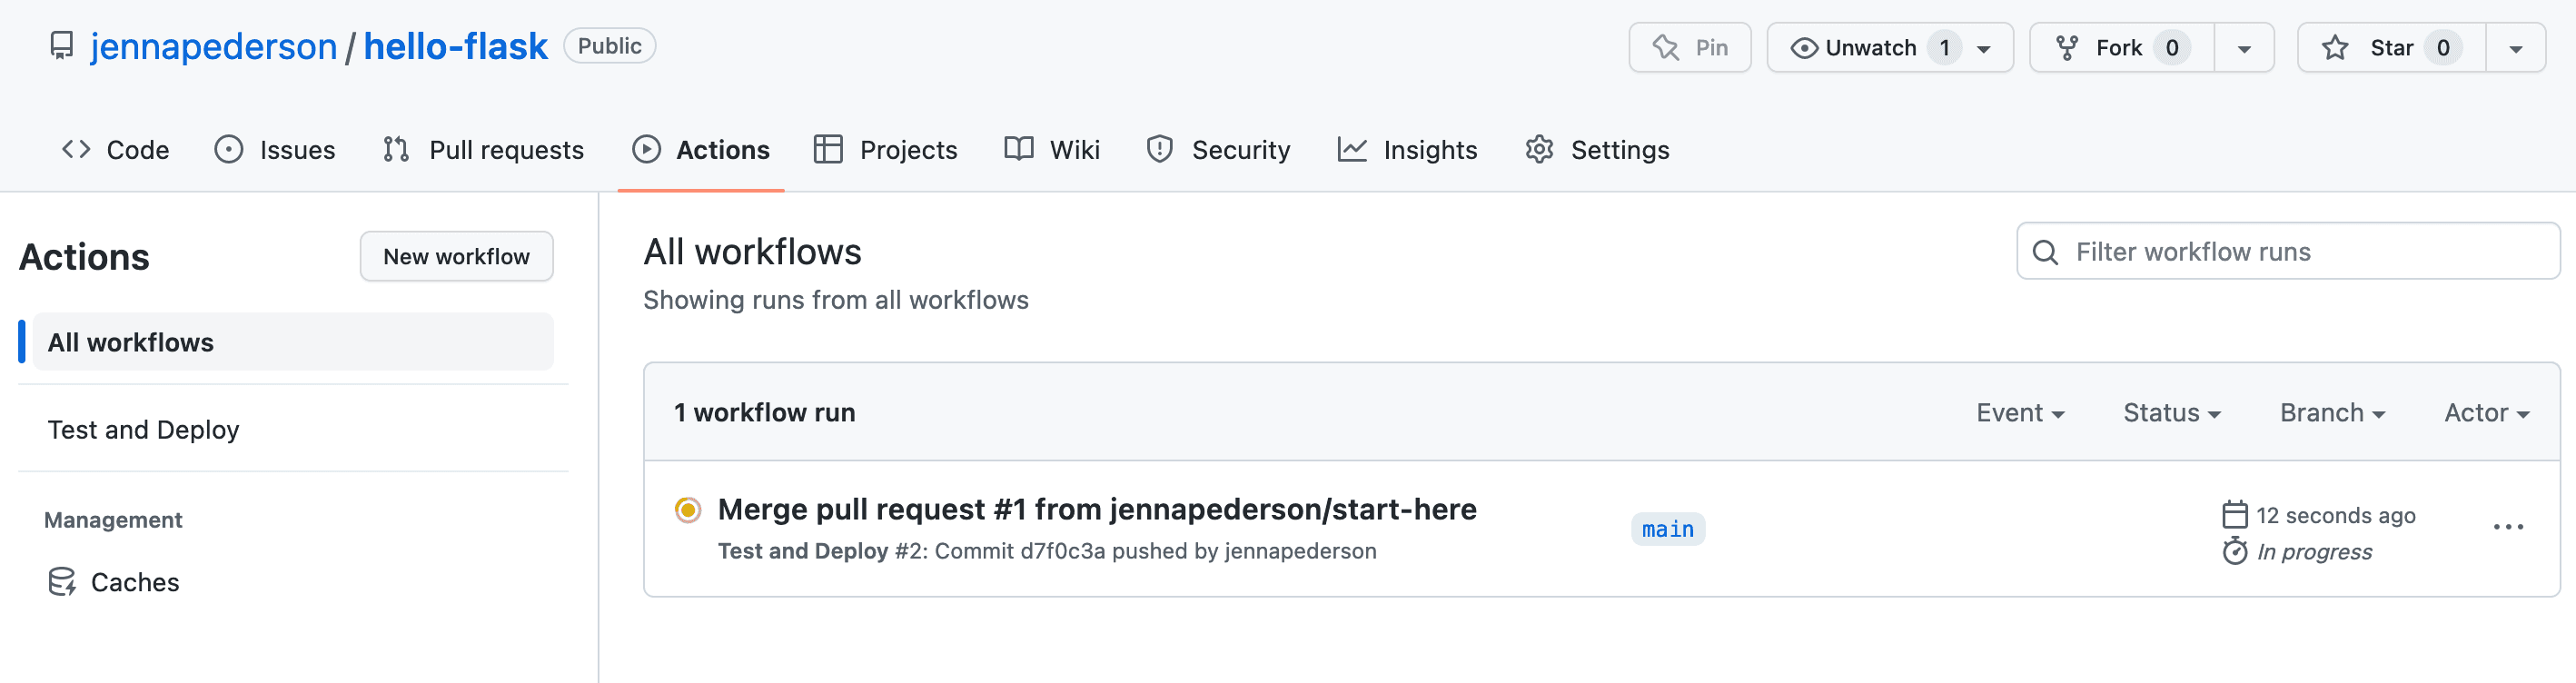 Shows the Actions tab of the hello-flask GitHub repo, where one workflow run has started